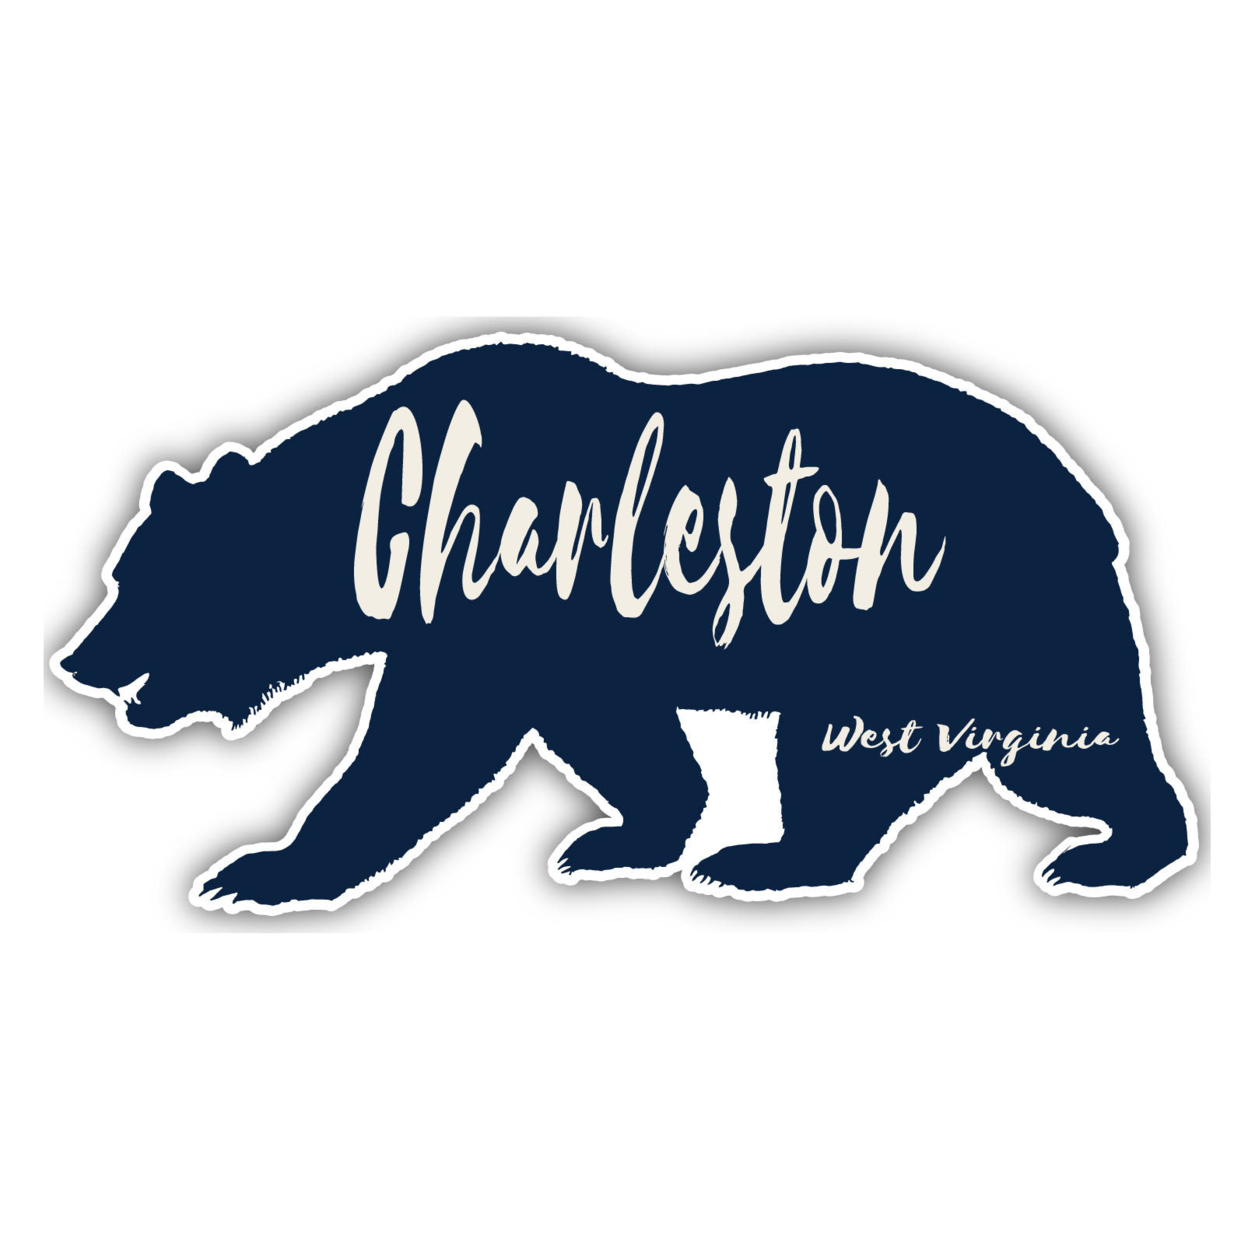 Charleston West Virginia Souvenir Decorative Stickers (Choose Theme And Size) - 4-Pack, 2-Inch, Bear